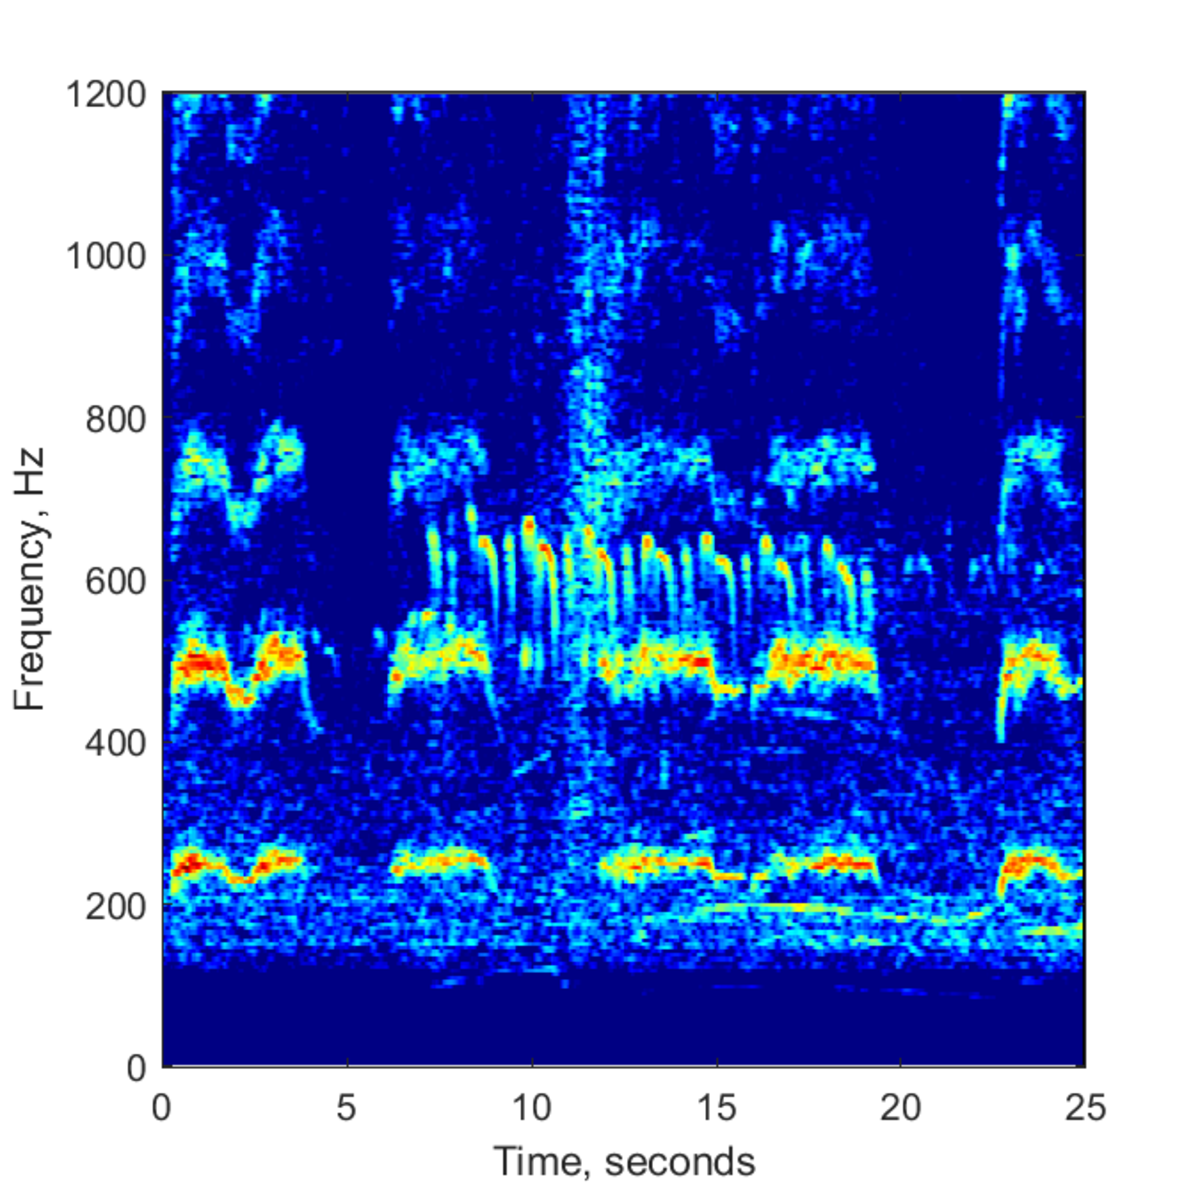 Soundprints of two bees' flying sounds